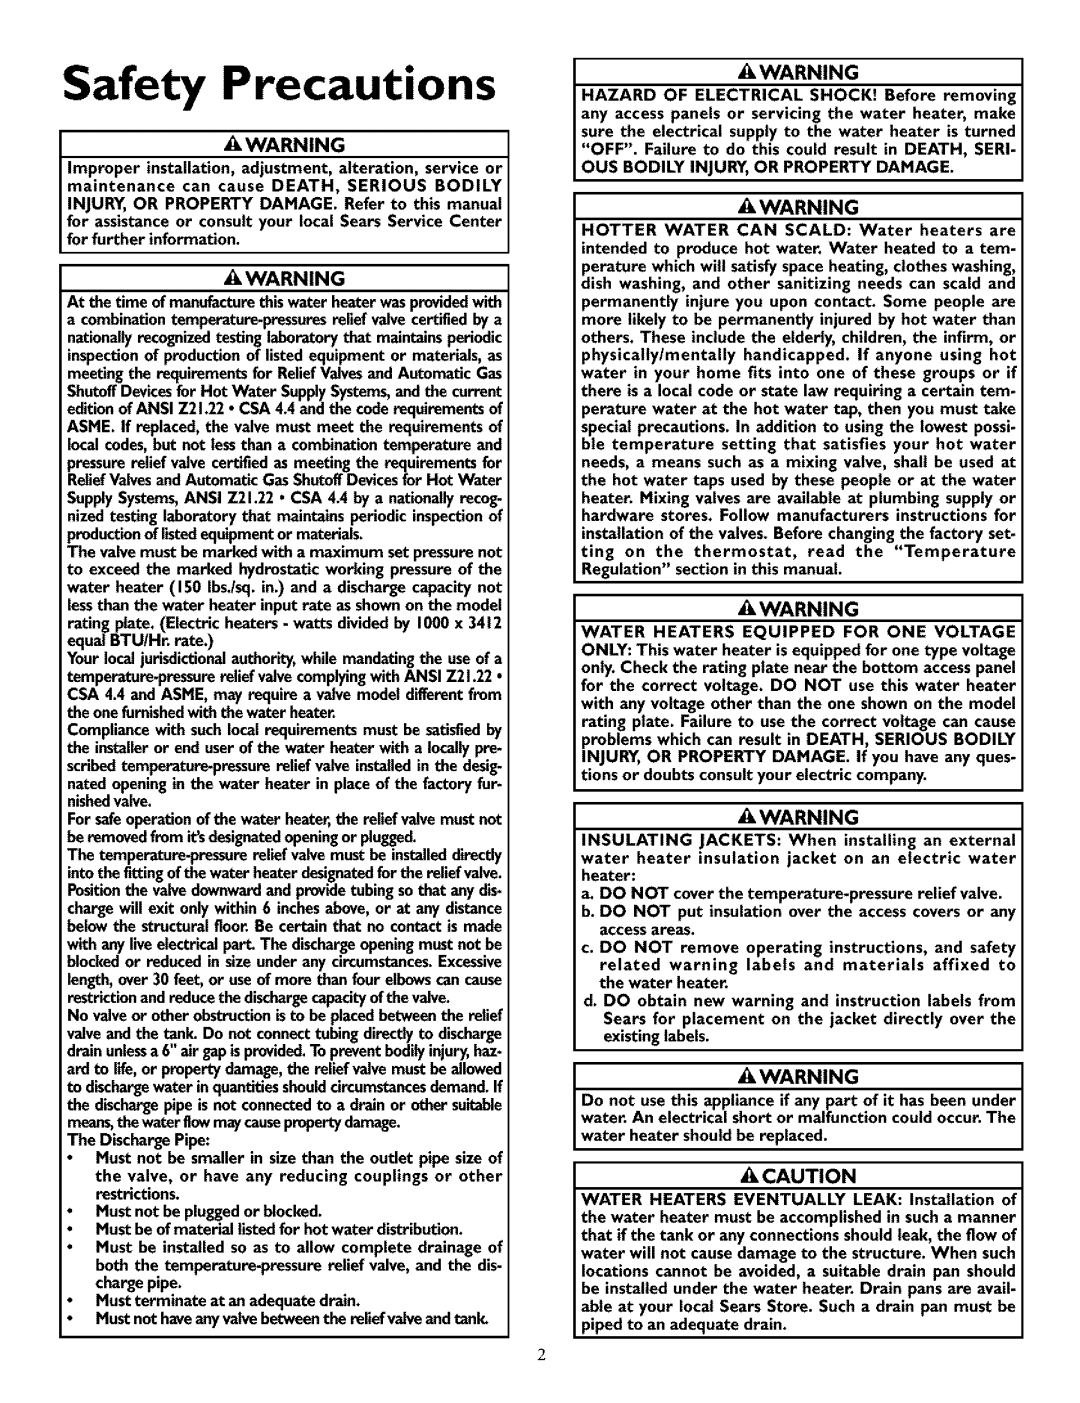 Kenmore 153.31702 Safety Precautions, A Caution, Awarningj, for further information AWARNING, The DischargePipe 